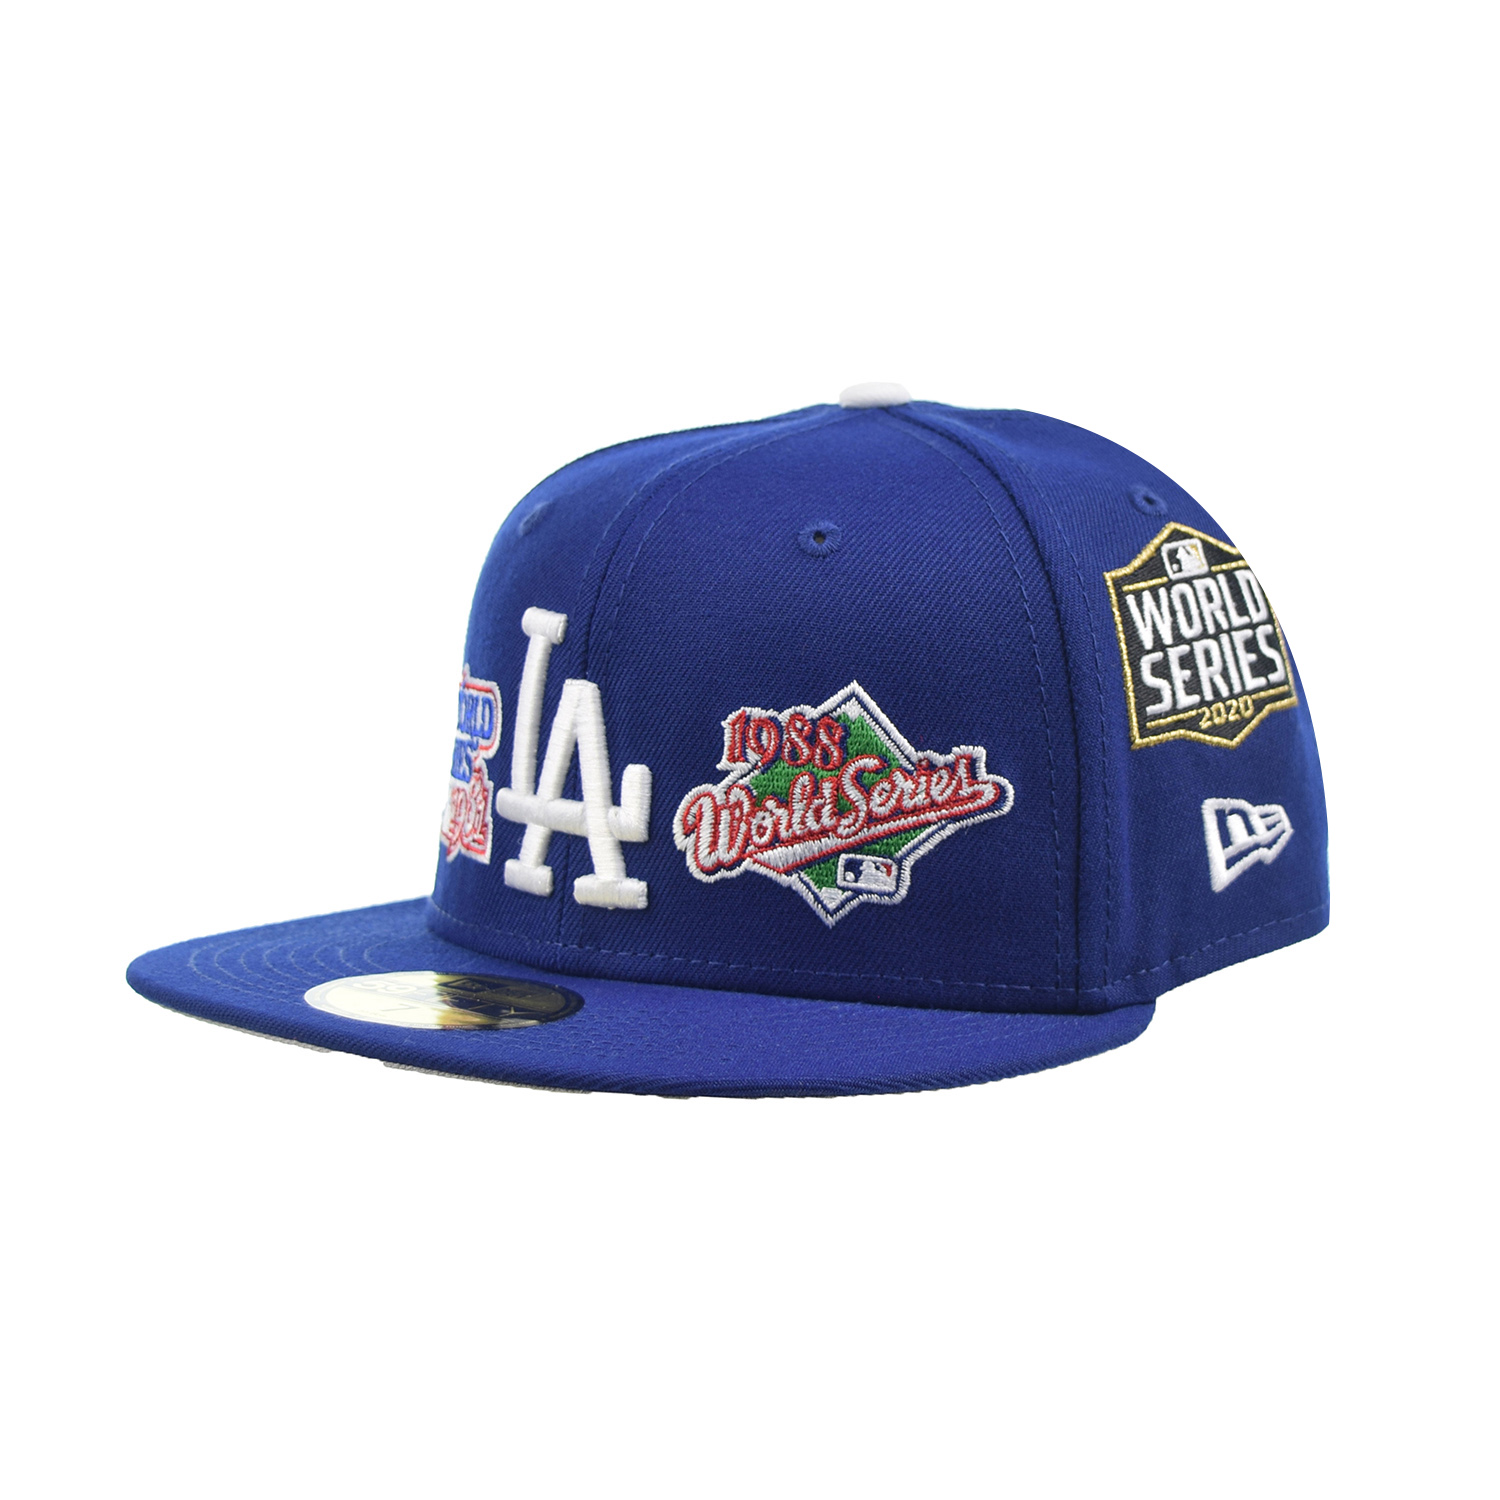 New Era Los Angeles Dodgers MLB World Champs Patch 59Fifty Fitted Men's Hat Blue 60180959 (Size 7 5/8)